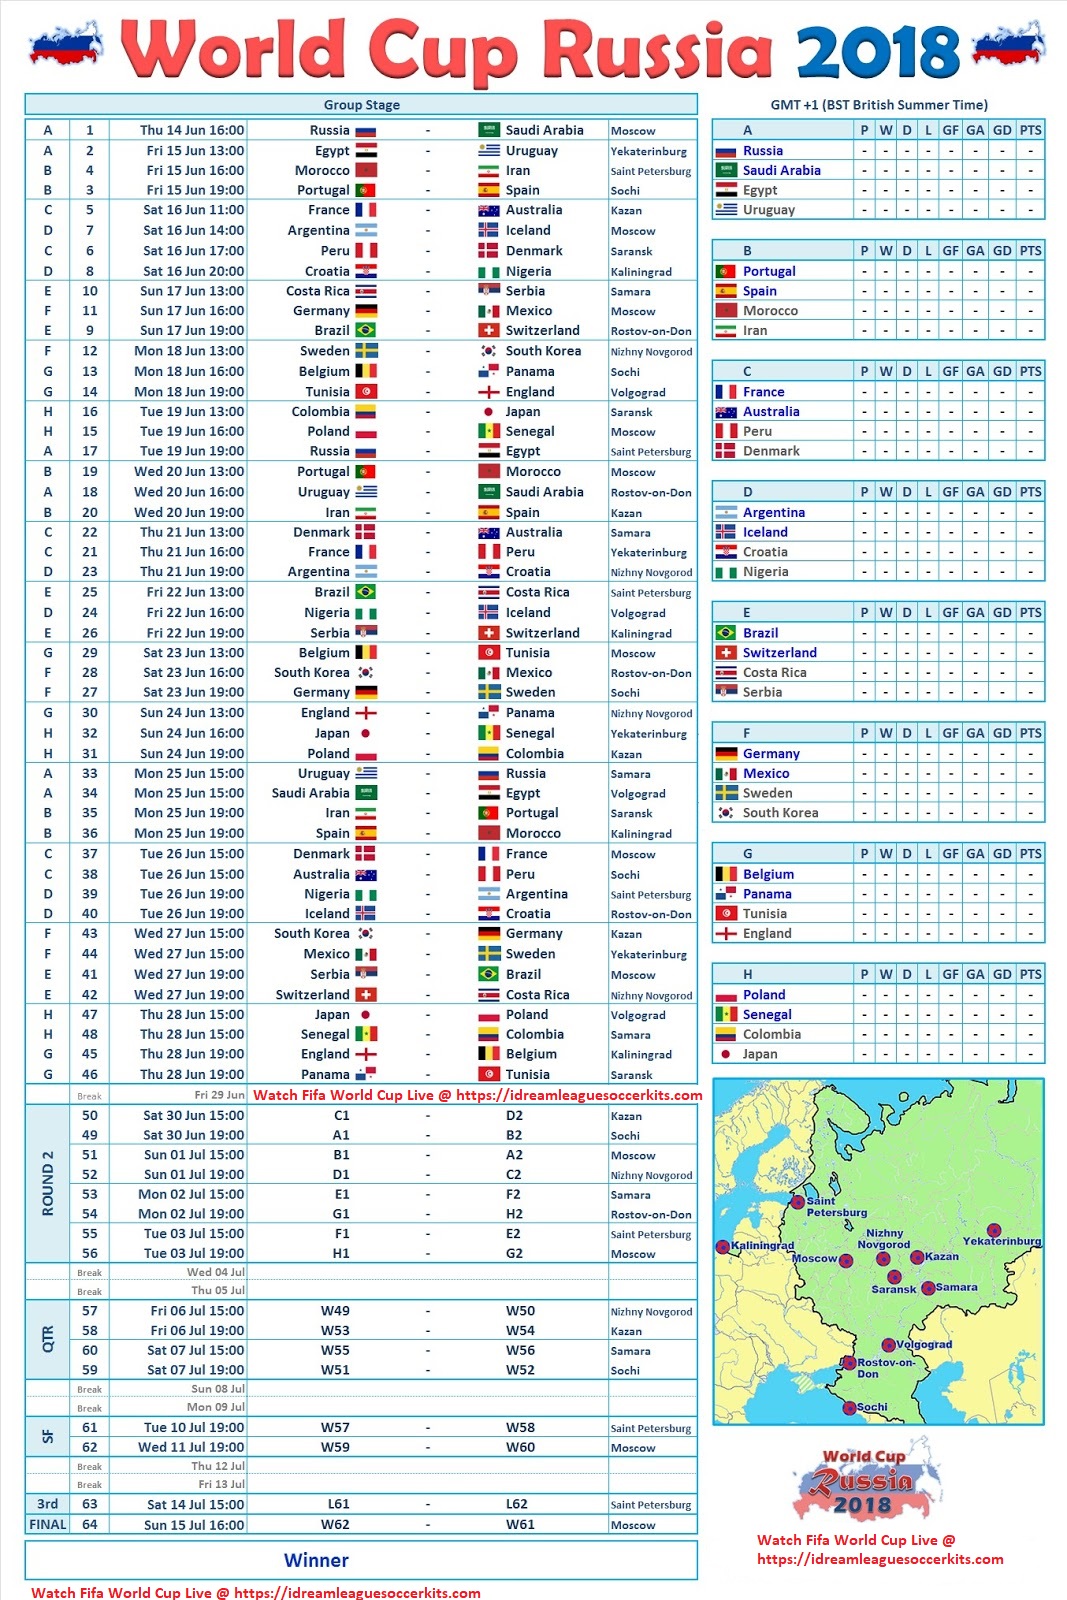 fifa world cup schedule 2019